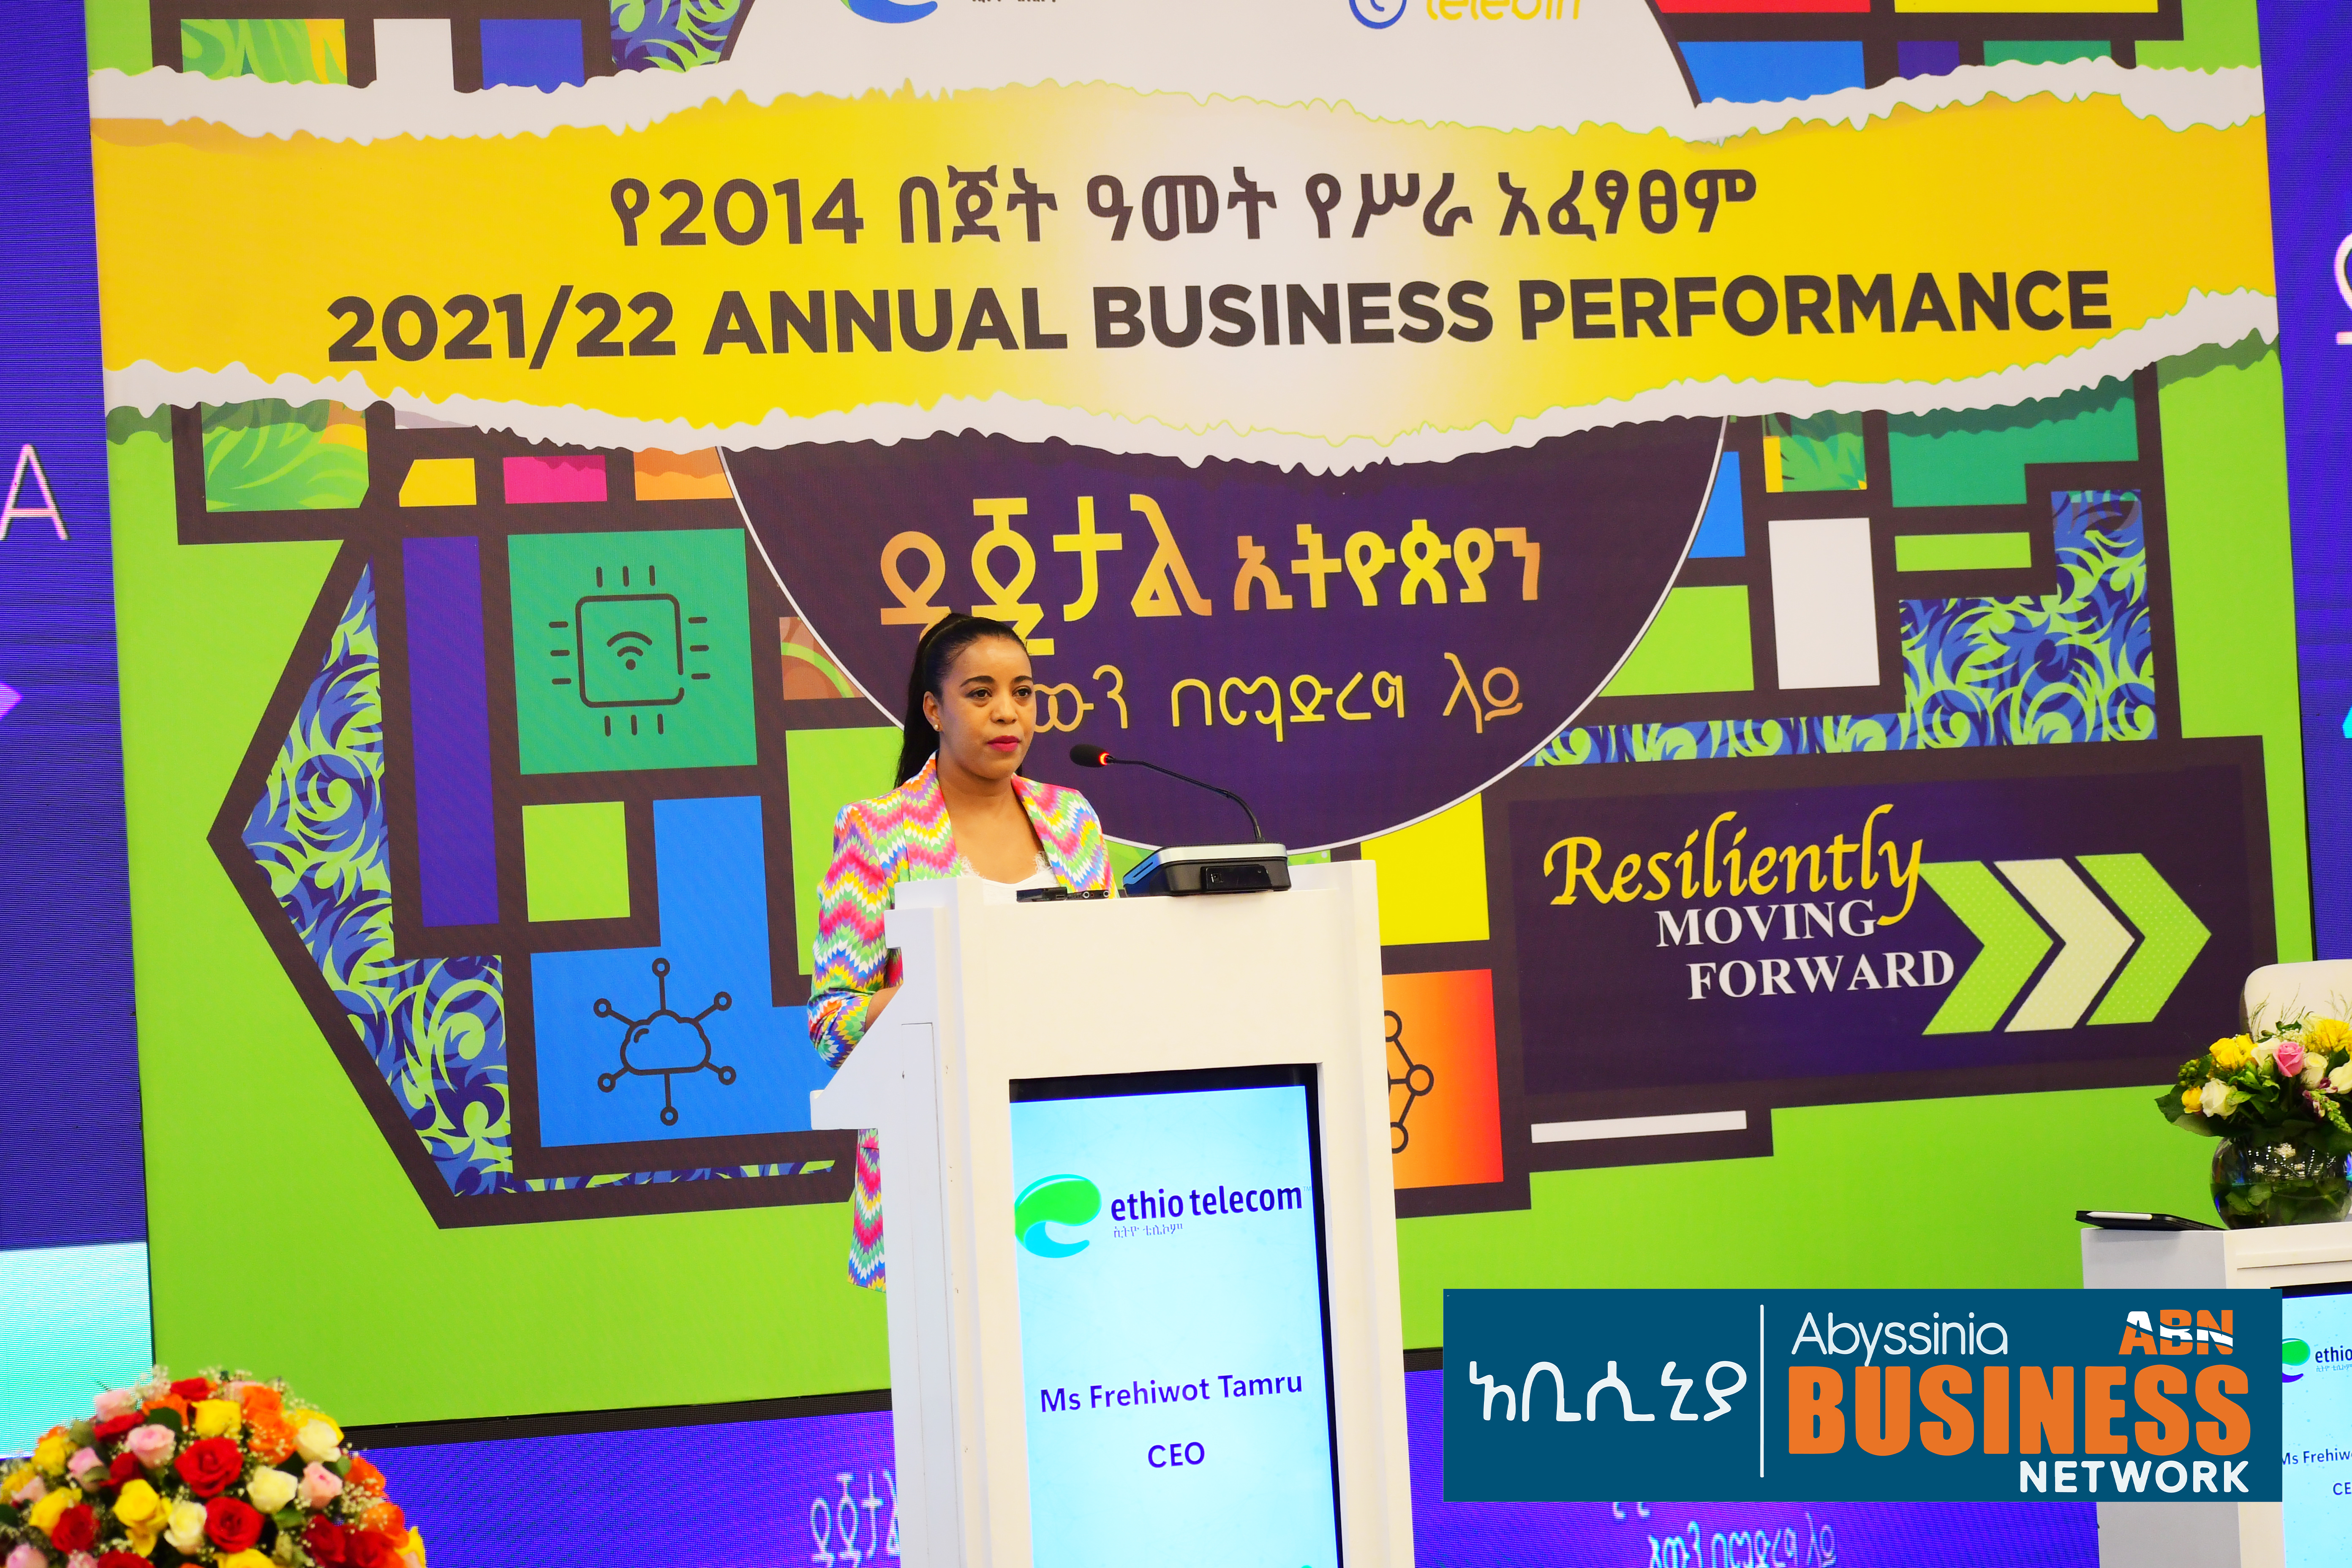 EthioTelecom presents annual Business performance Report for 2014